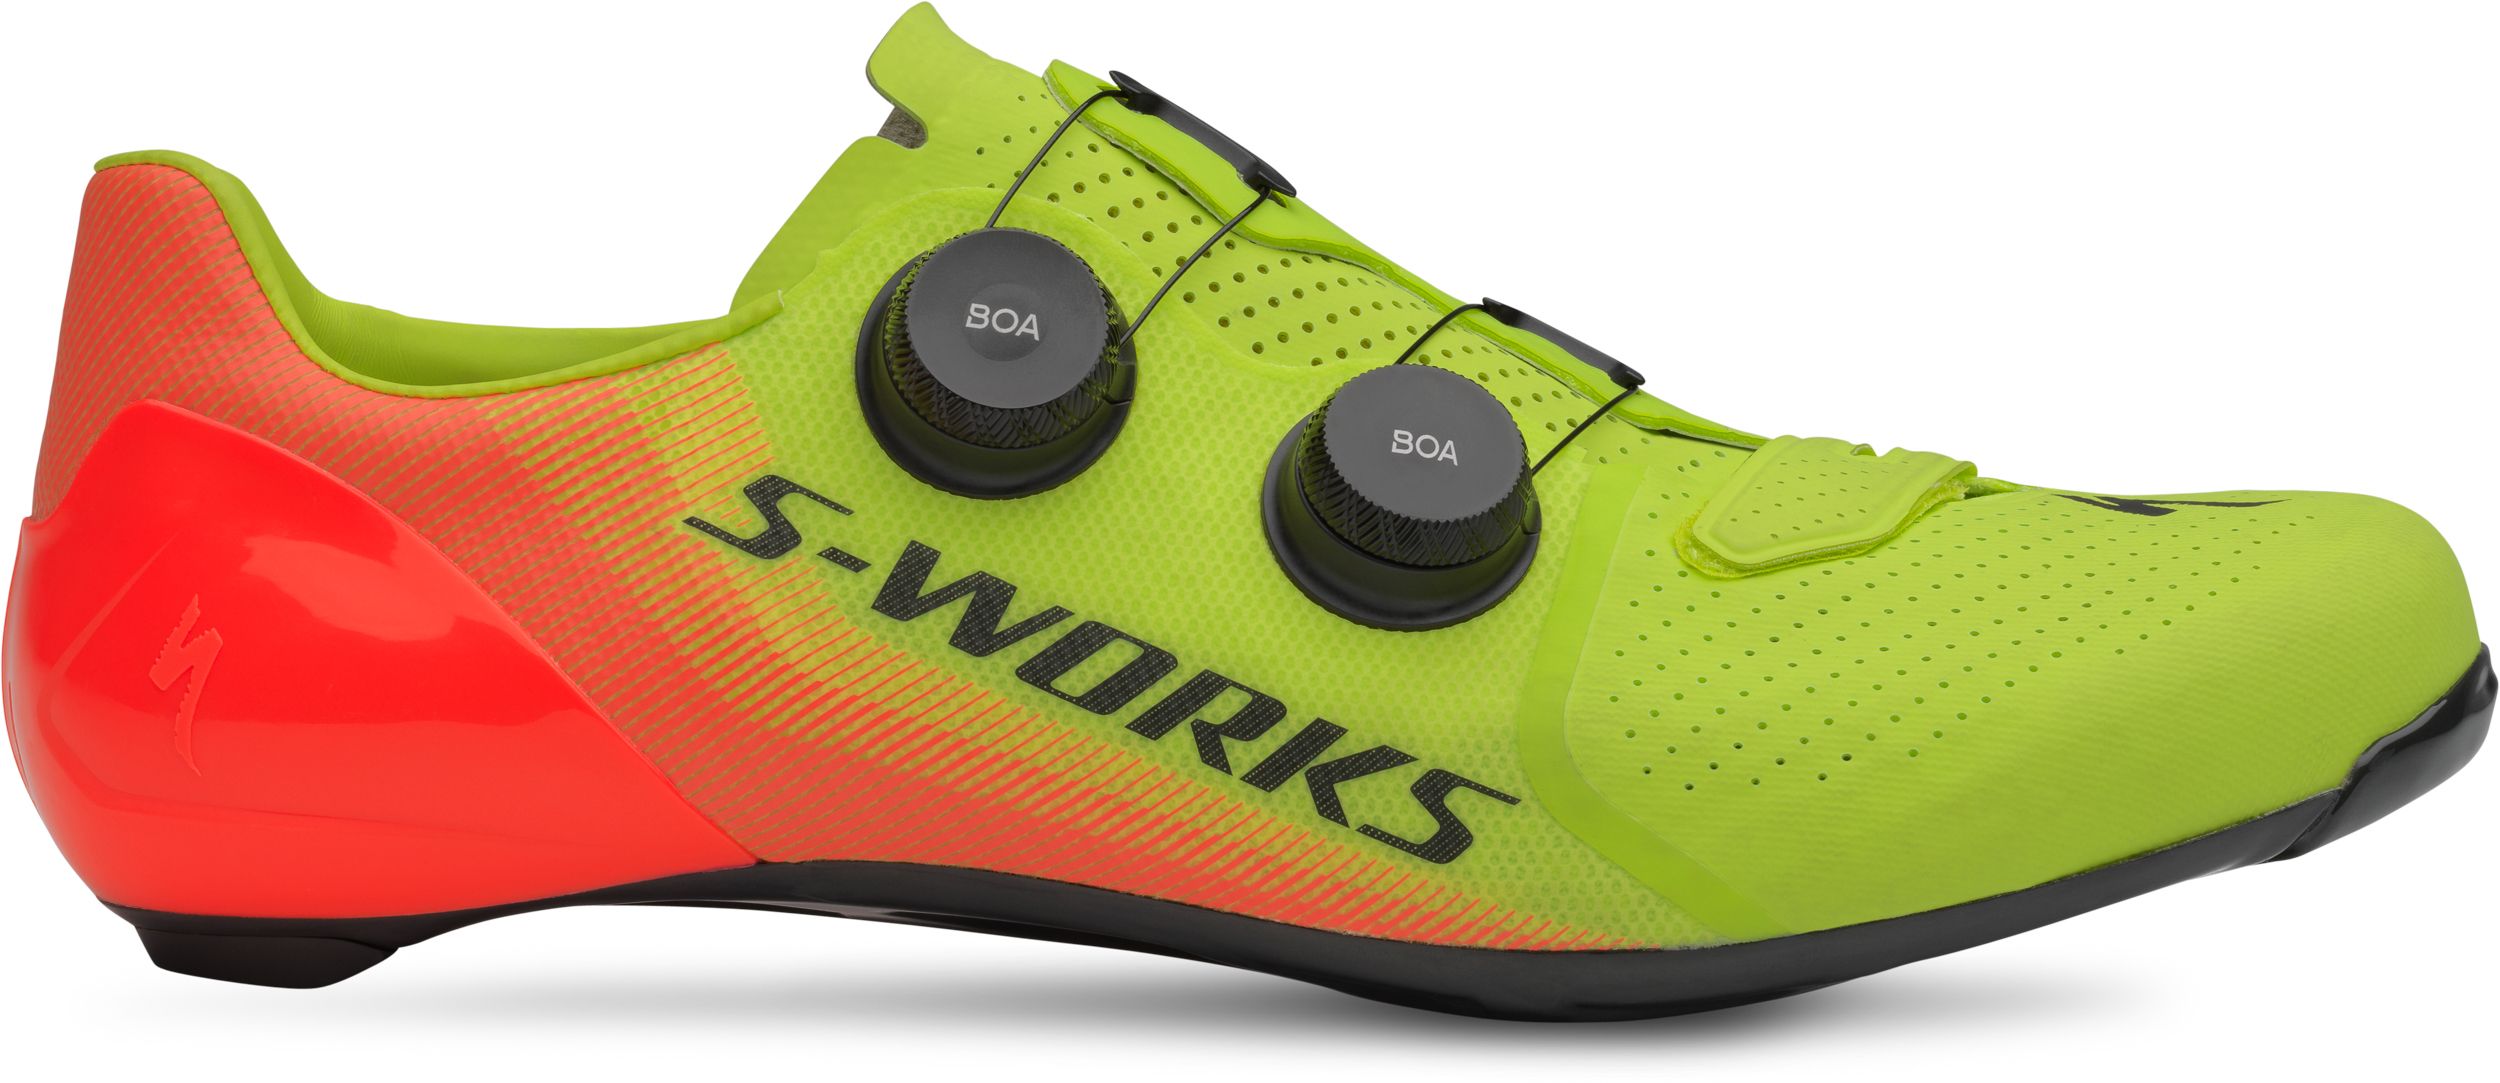 Specialized S-Works 7 - Road Cycling Shoe​ | Bicycling